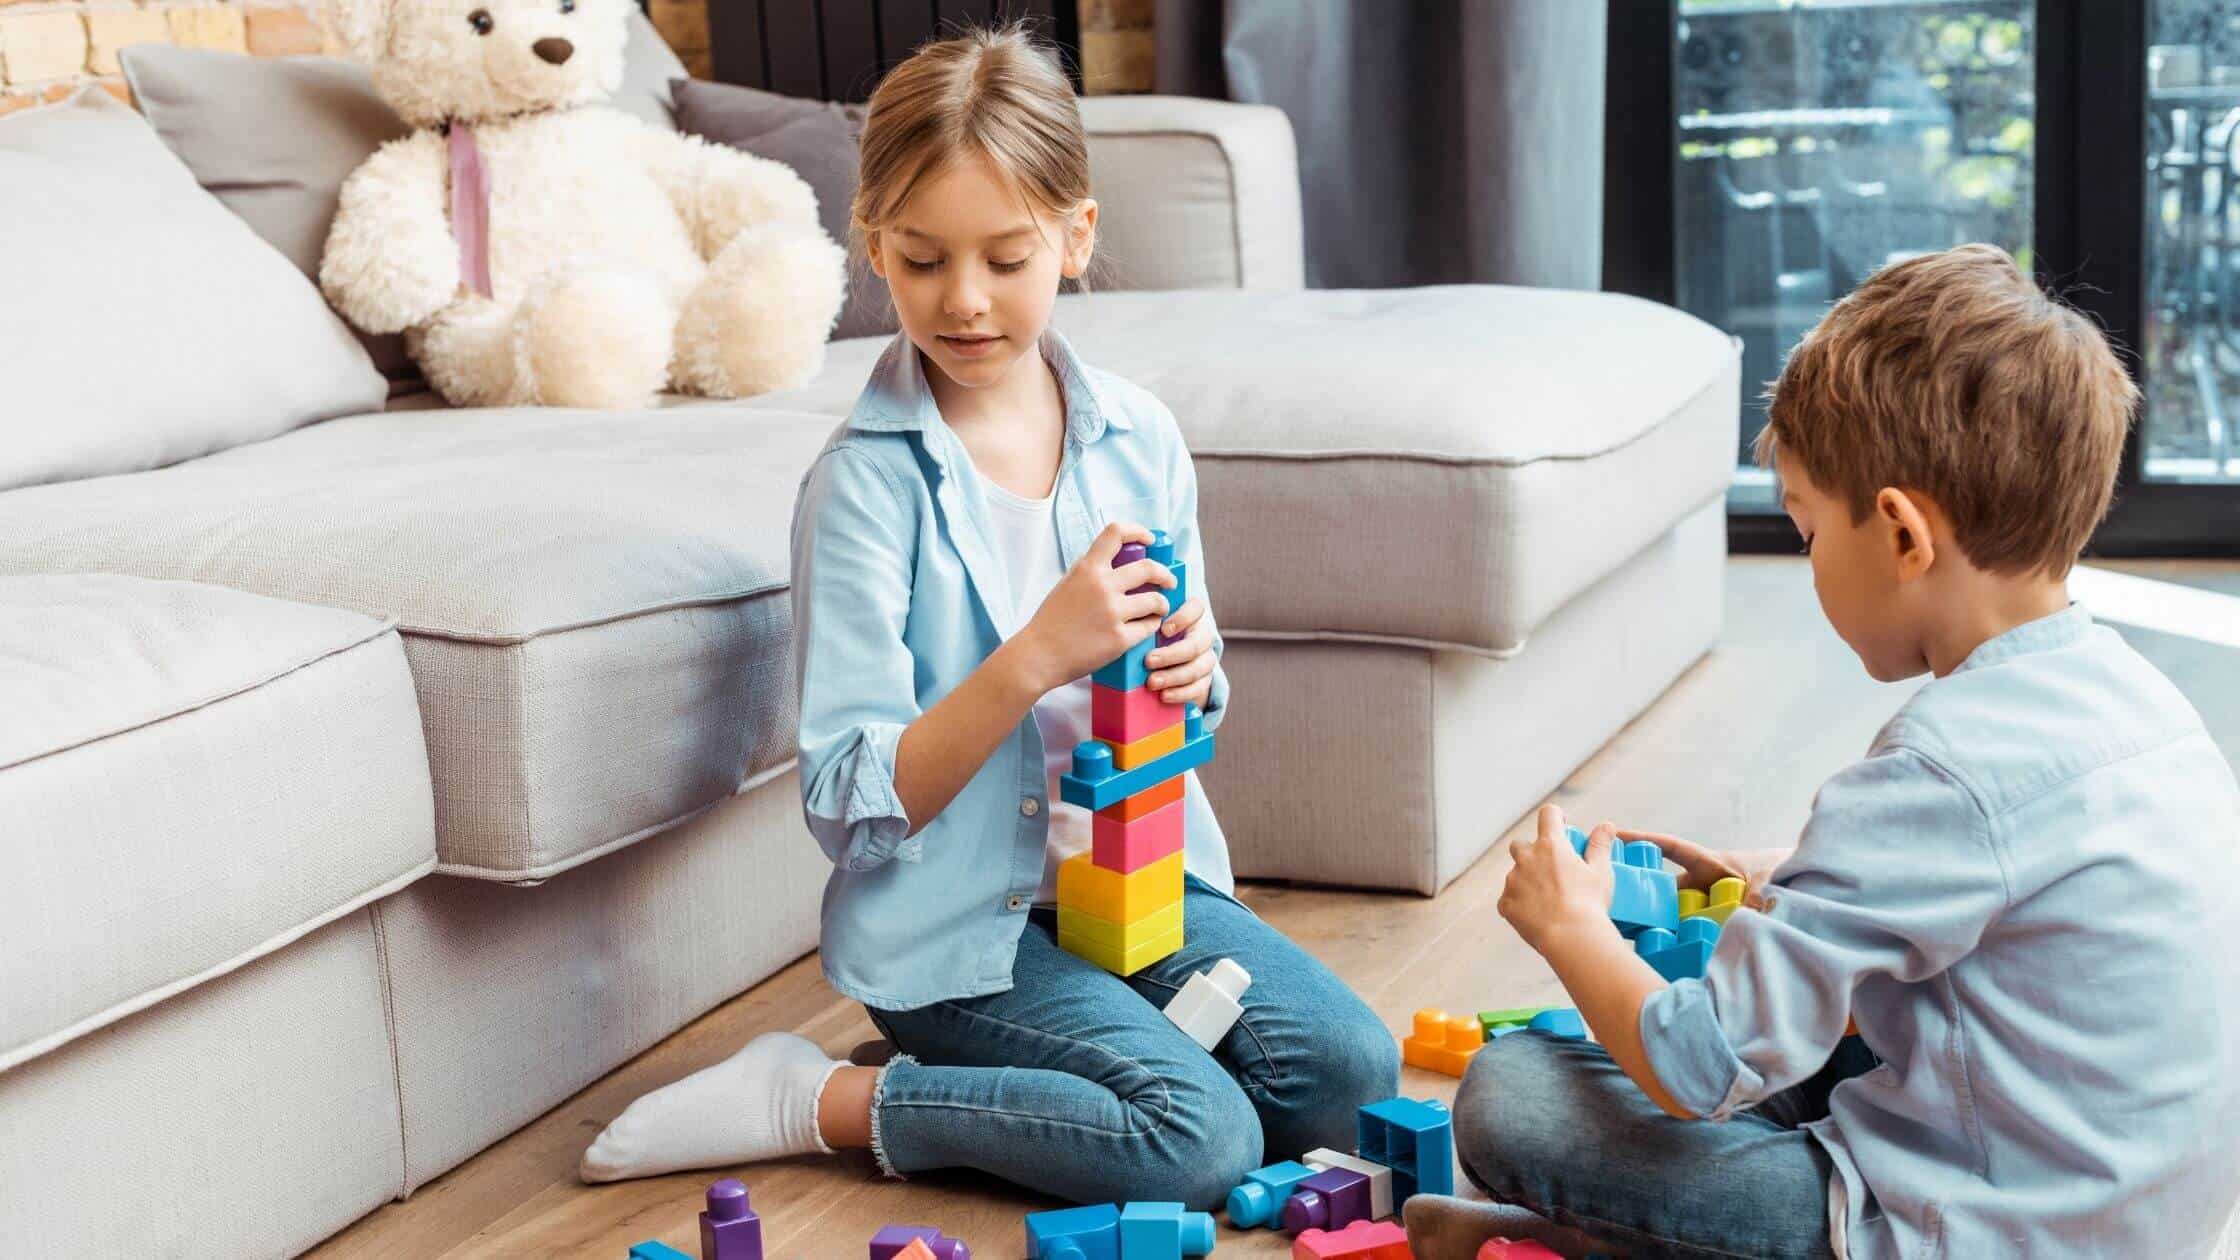 8 Creative Construction Toys for Kids Who Like to Build